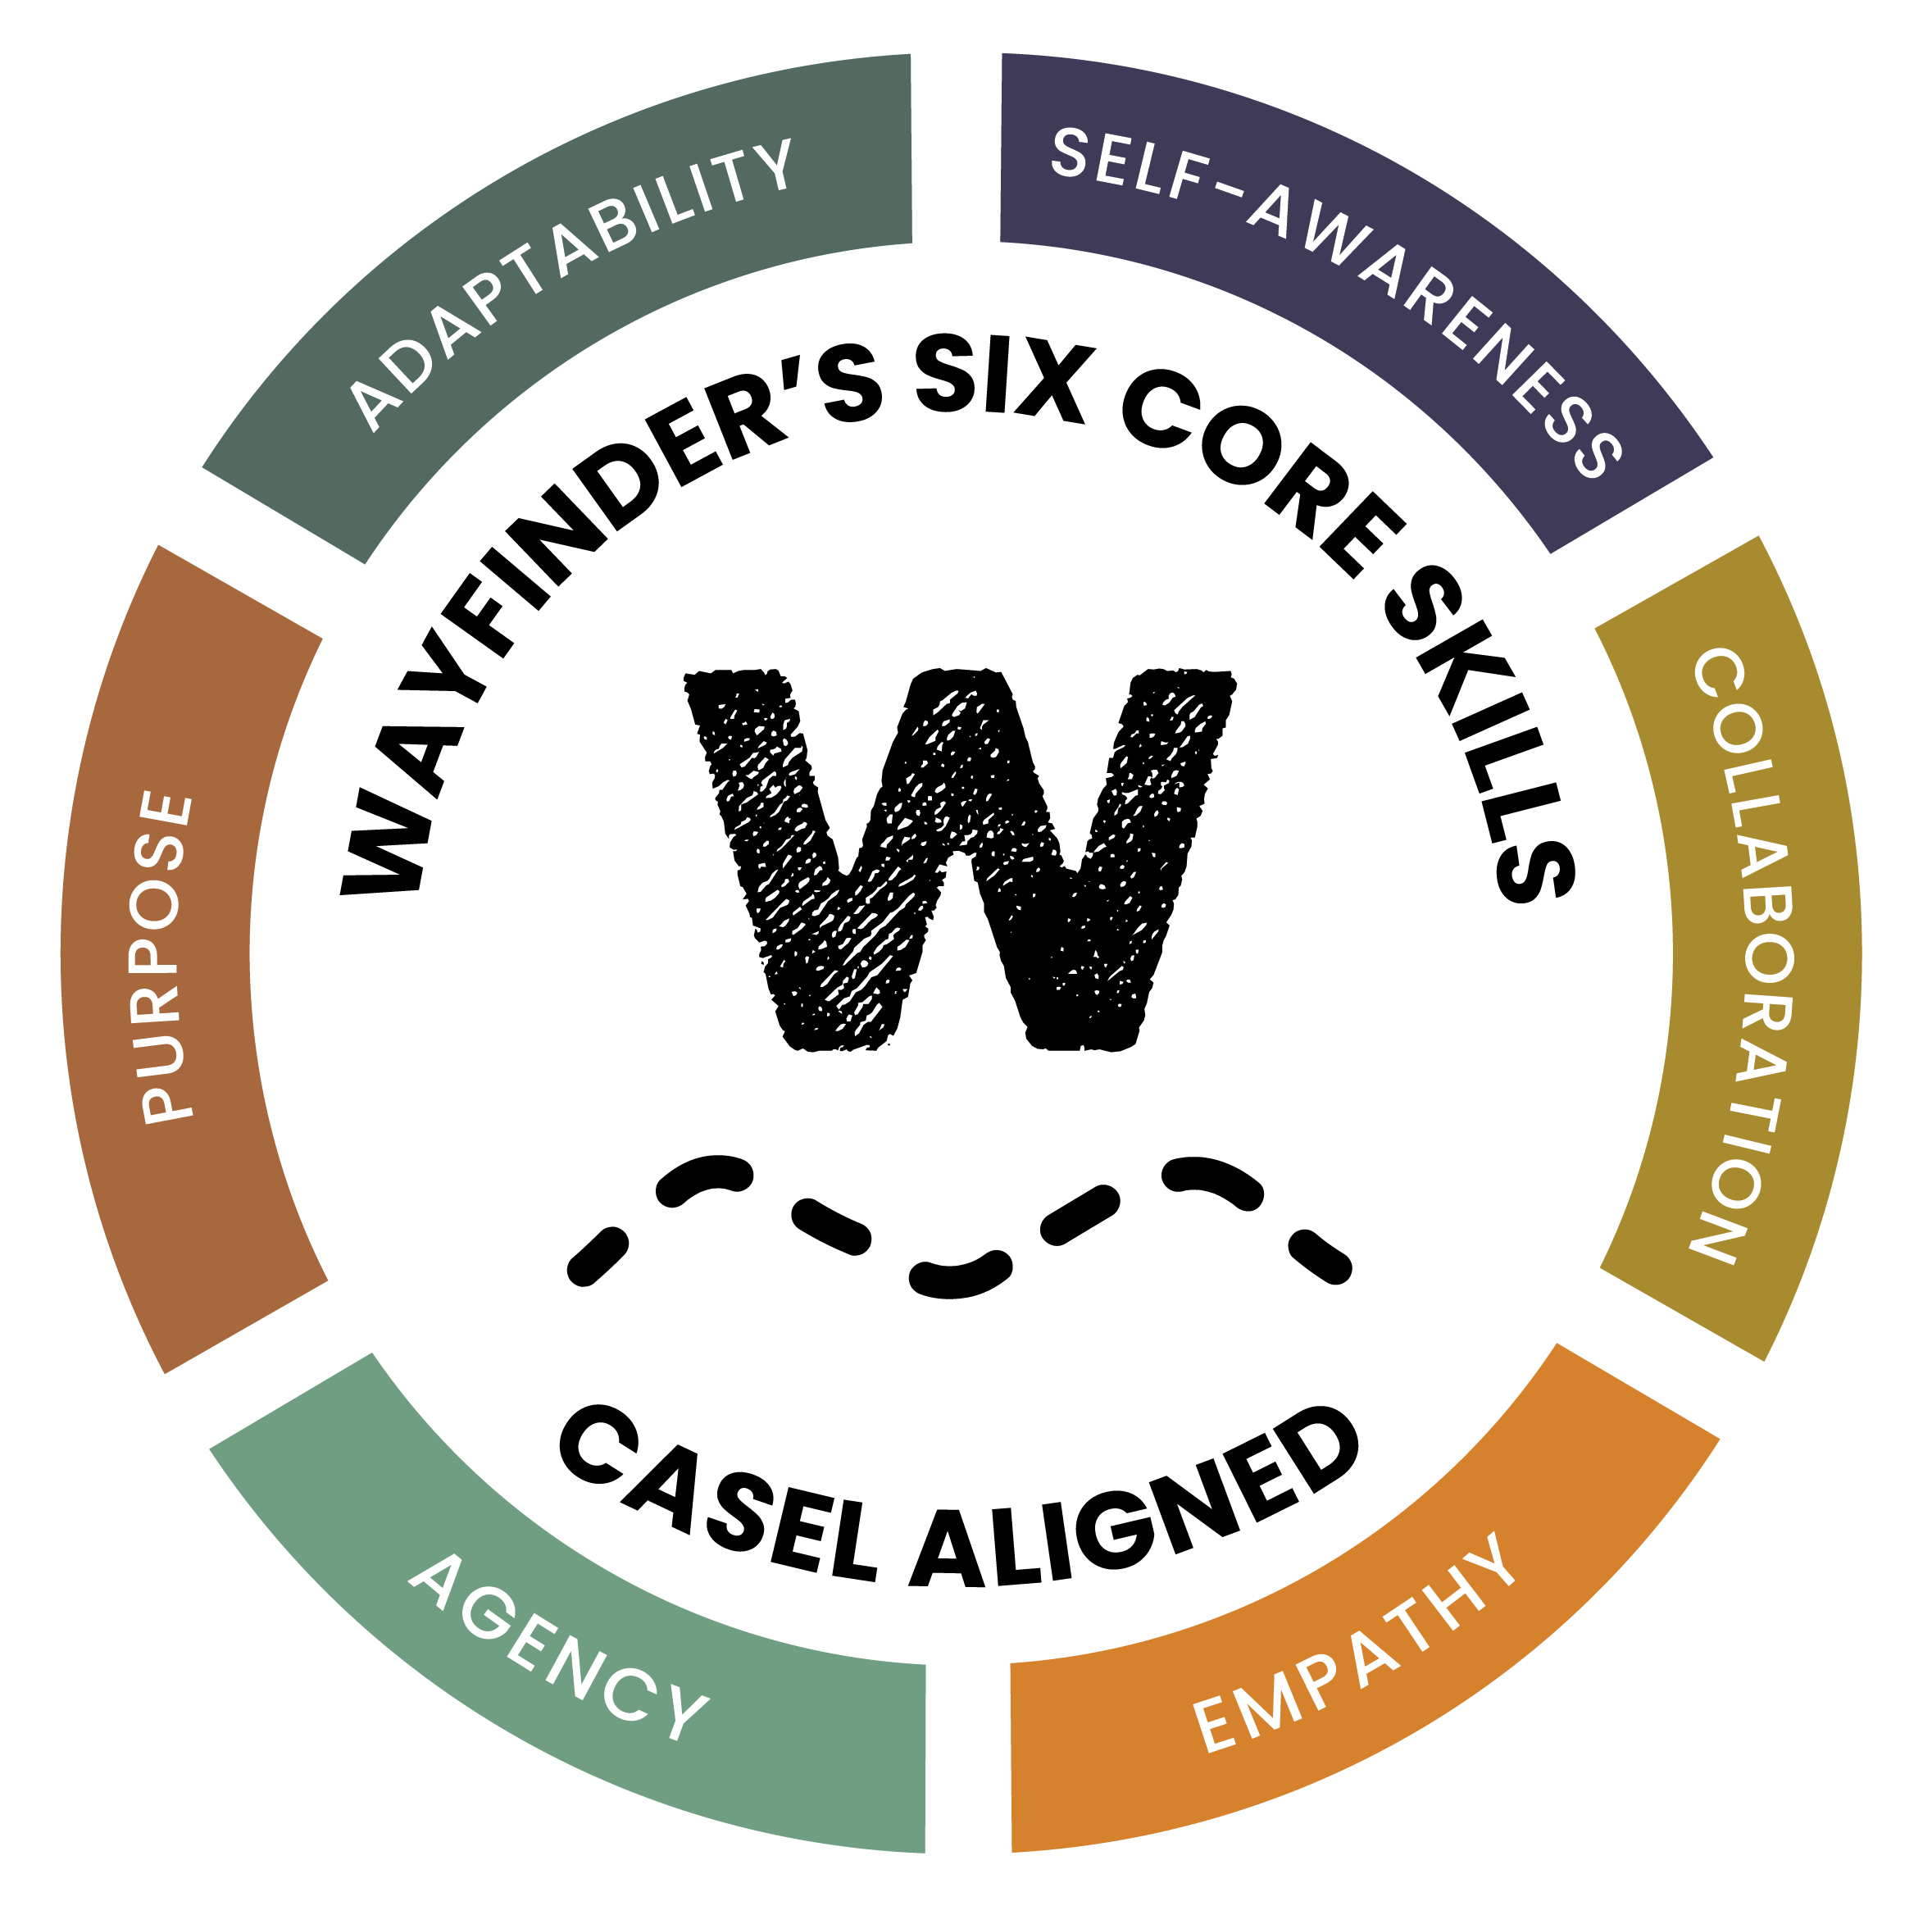 Circular graphic of Wayfinder's Six Core Skills, which include: adaptability, self-awareness, collaboration, empathy, agency, and purpose